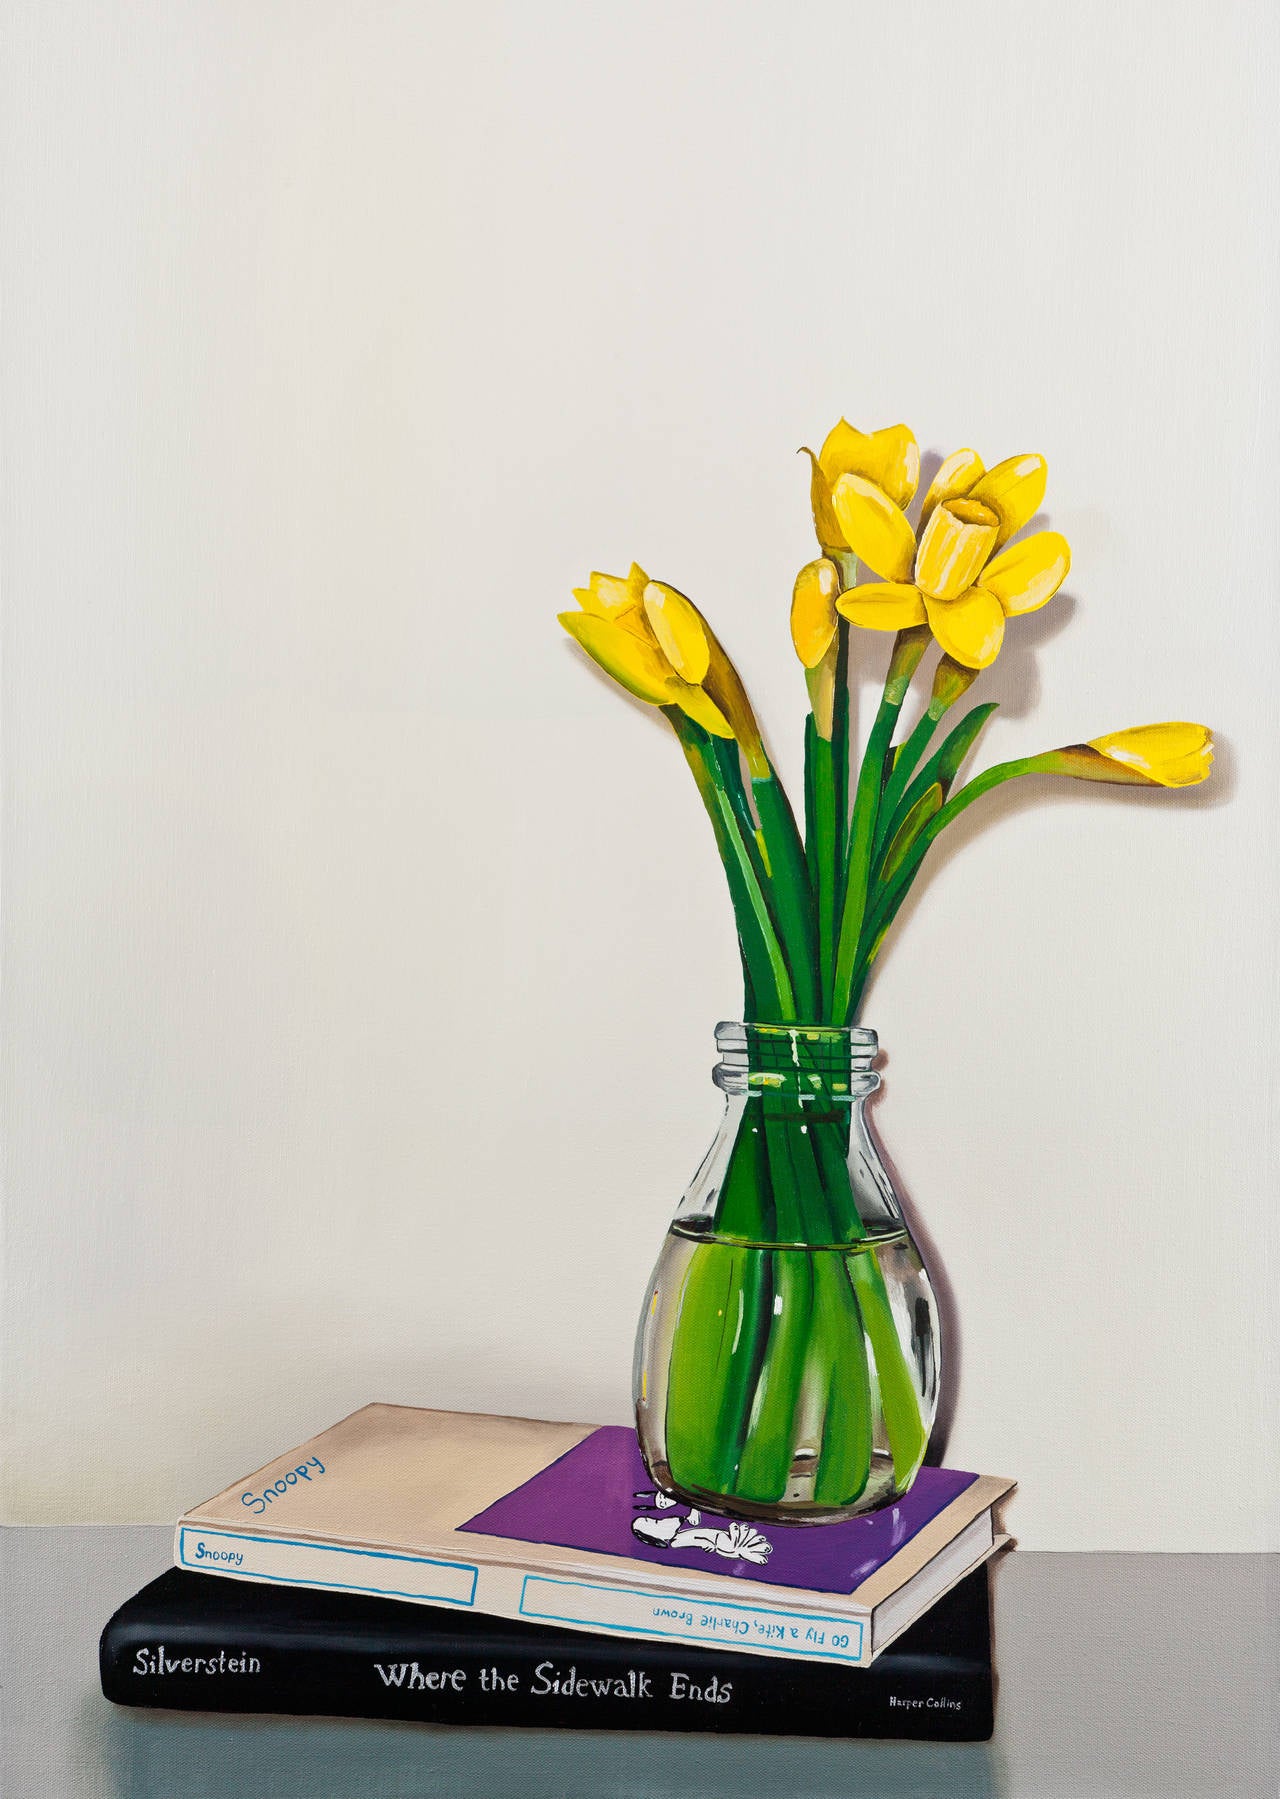 Yellow Daffodils - Print by Libby Black